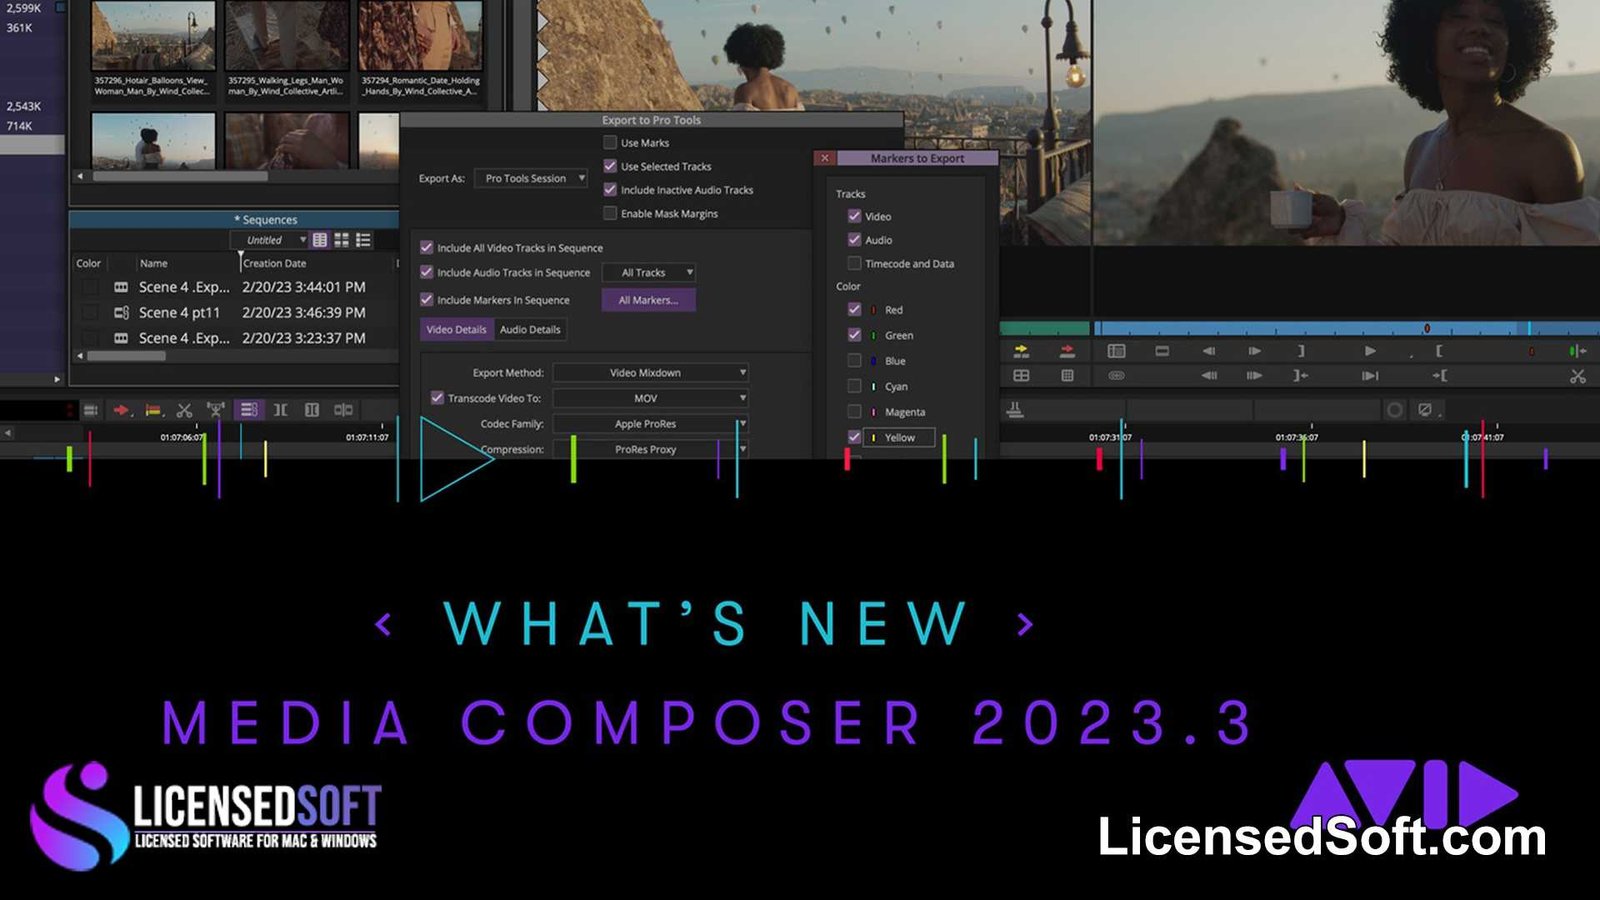 Avid Media Composer 2023.3 Perpetual License By LicensedSoft